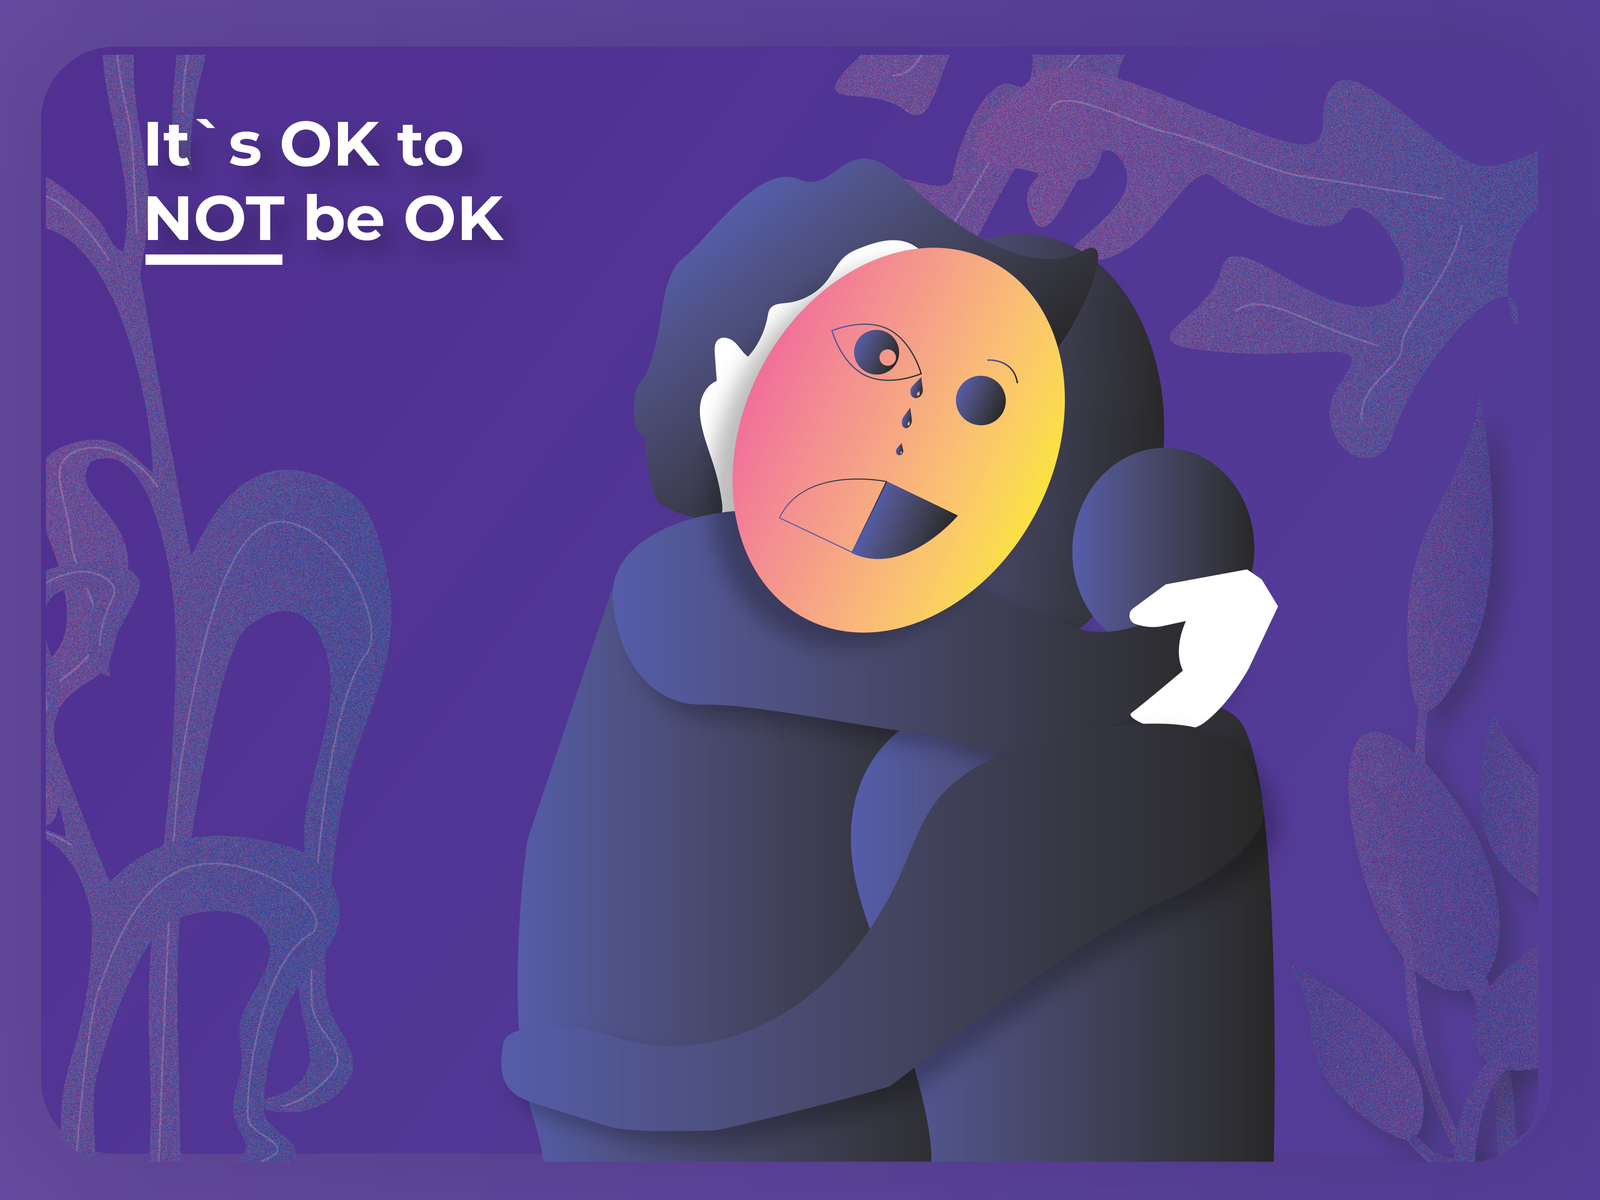 Depression & Anxiety by Anish Hirlekar on Dribbble